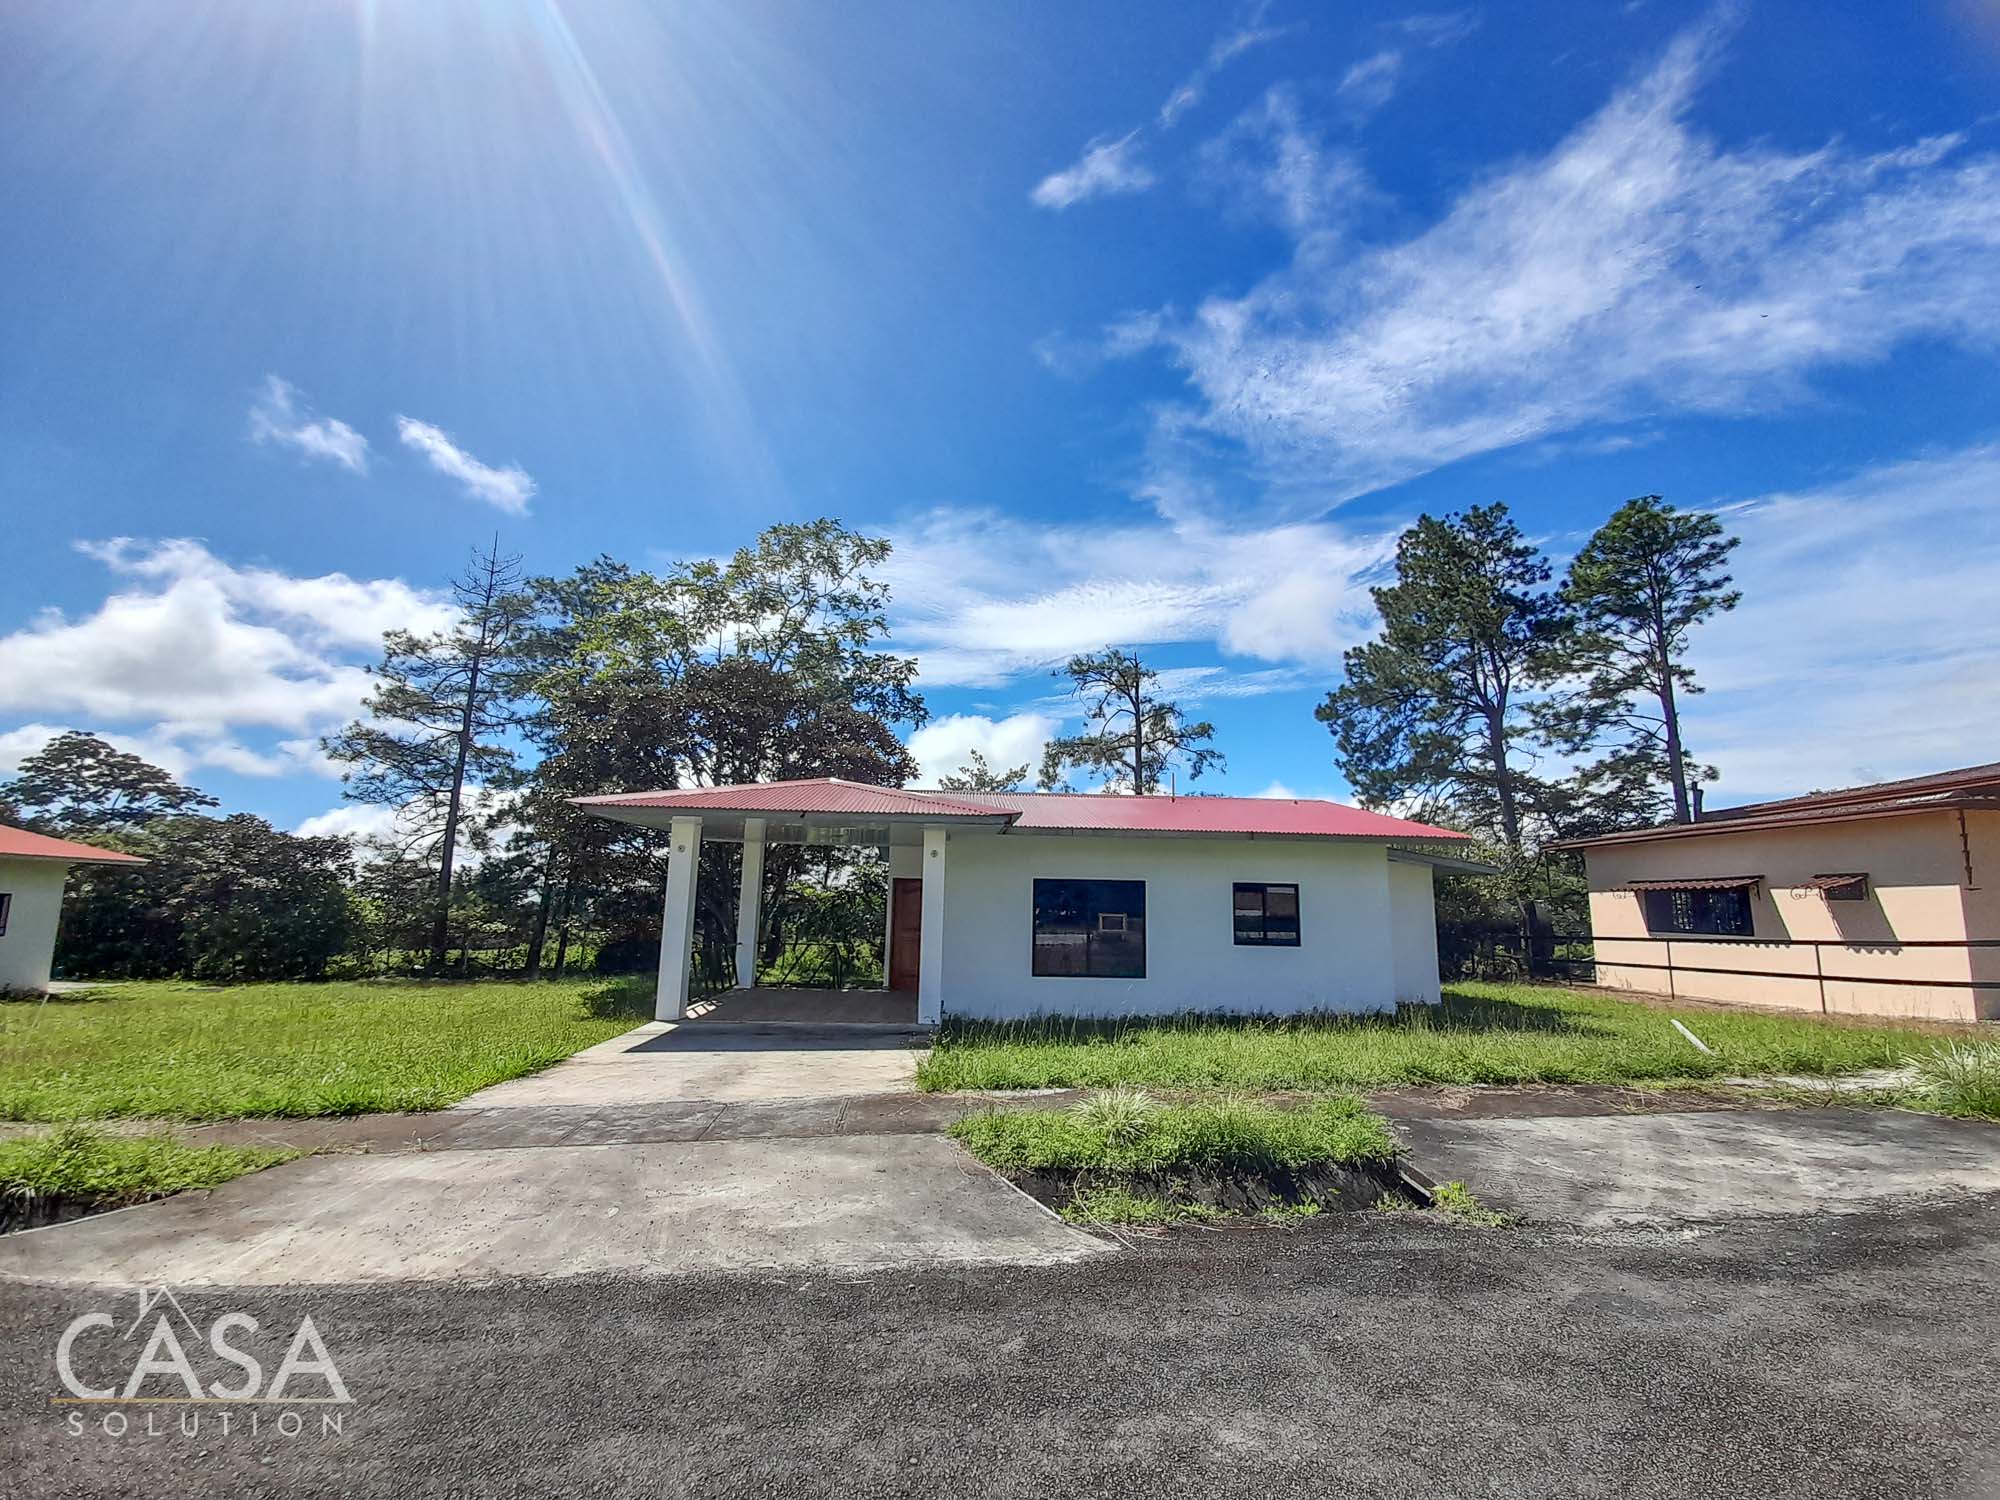 New Home with 2-bed, 2-bath For Sale in Alto Boquete, Chiriqui. Just 12-minute drive from Downtown Boquete